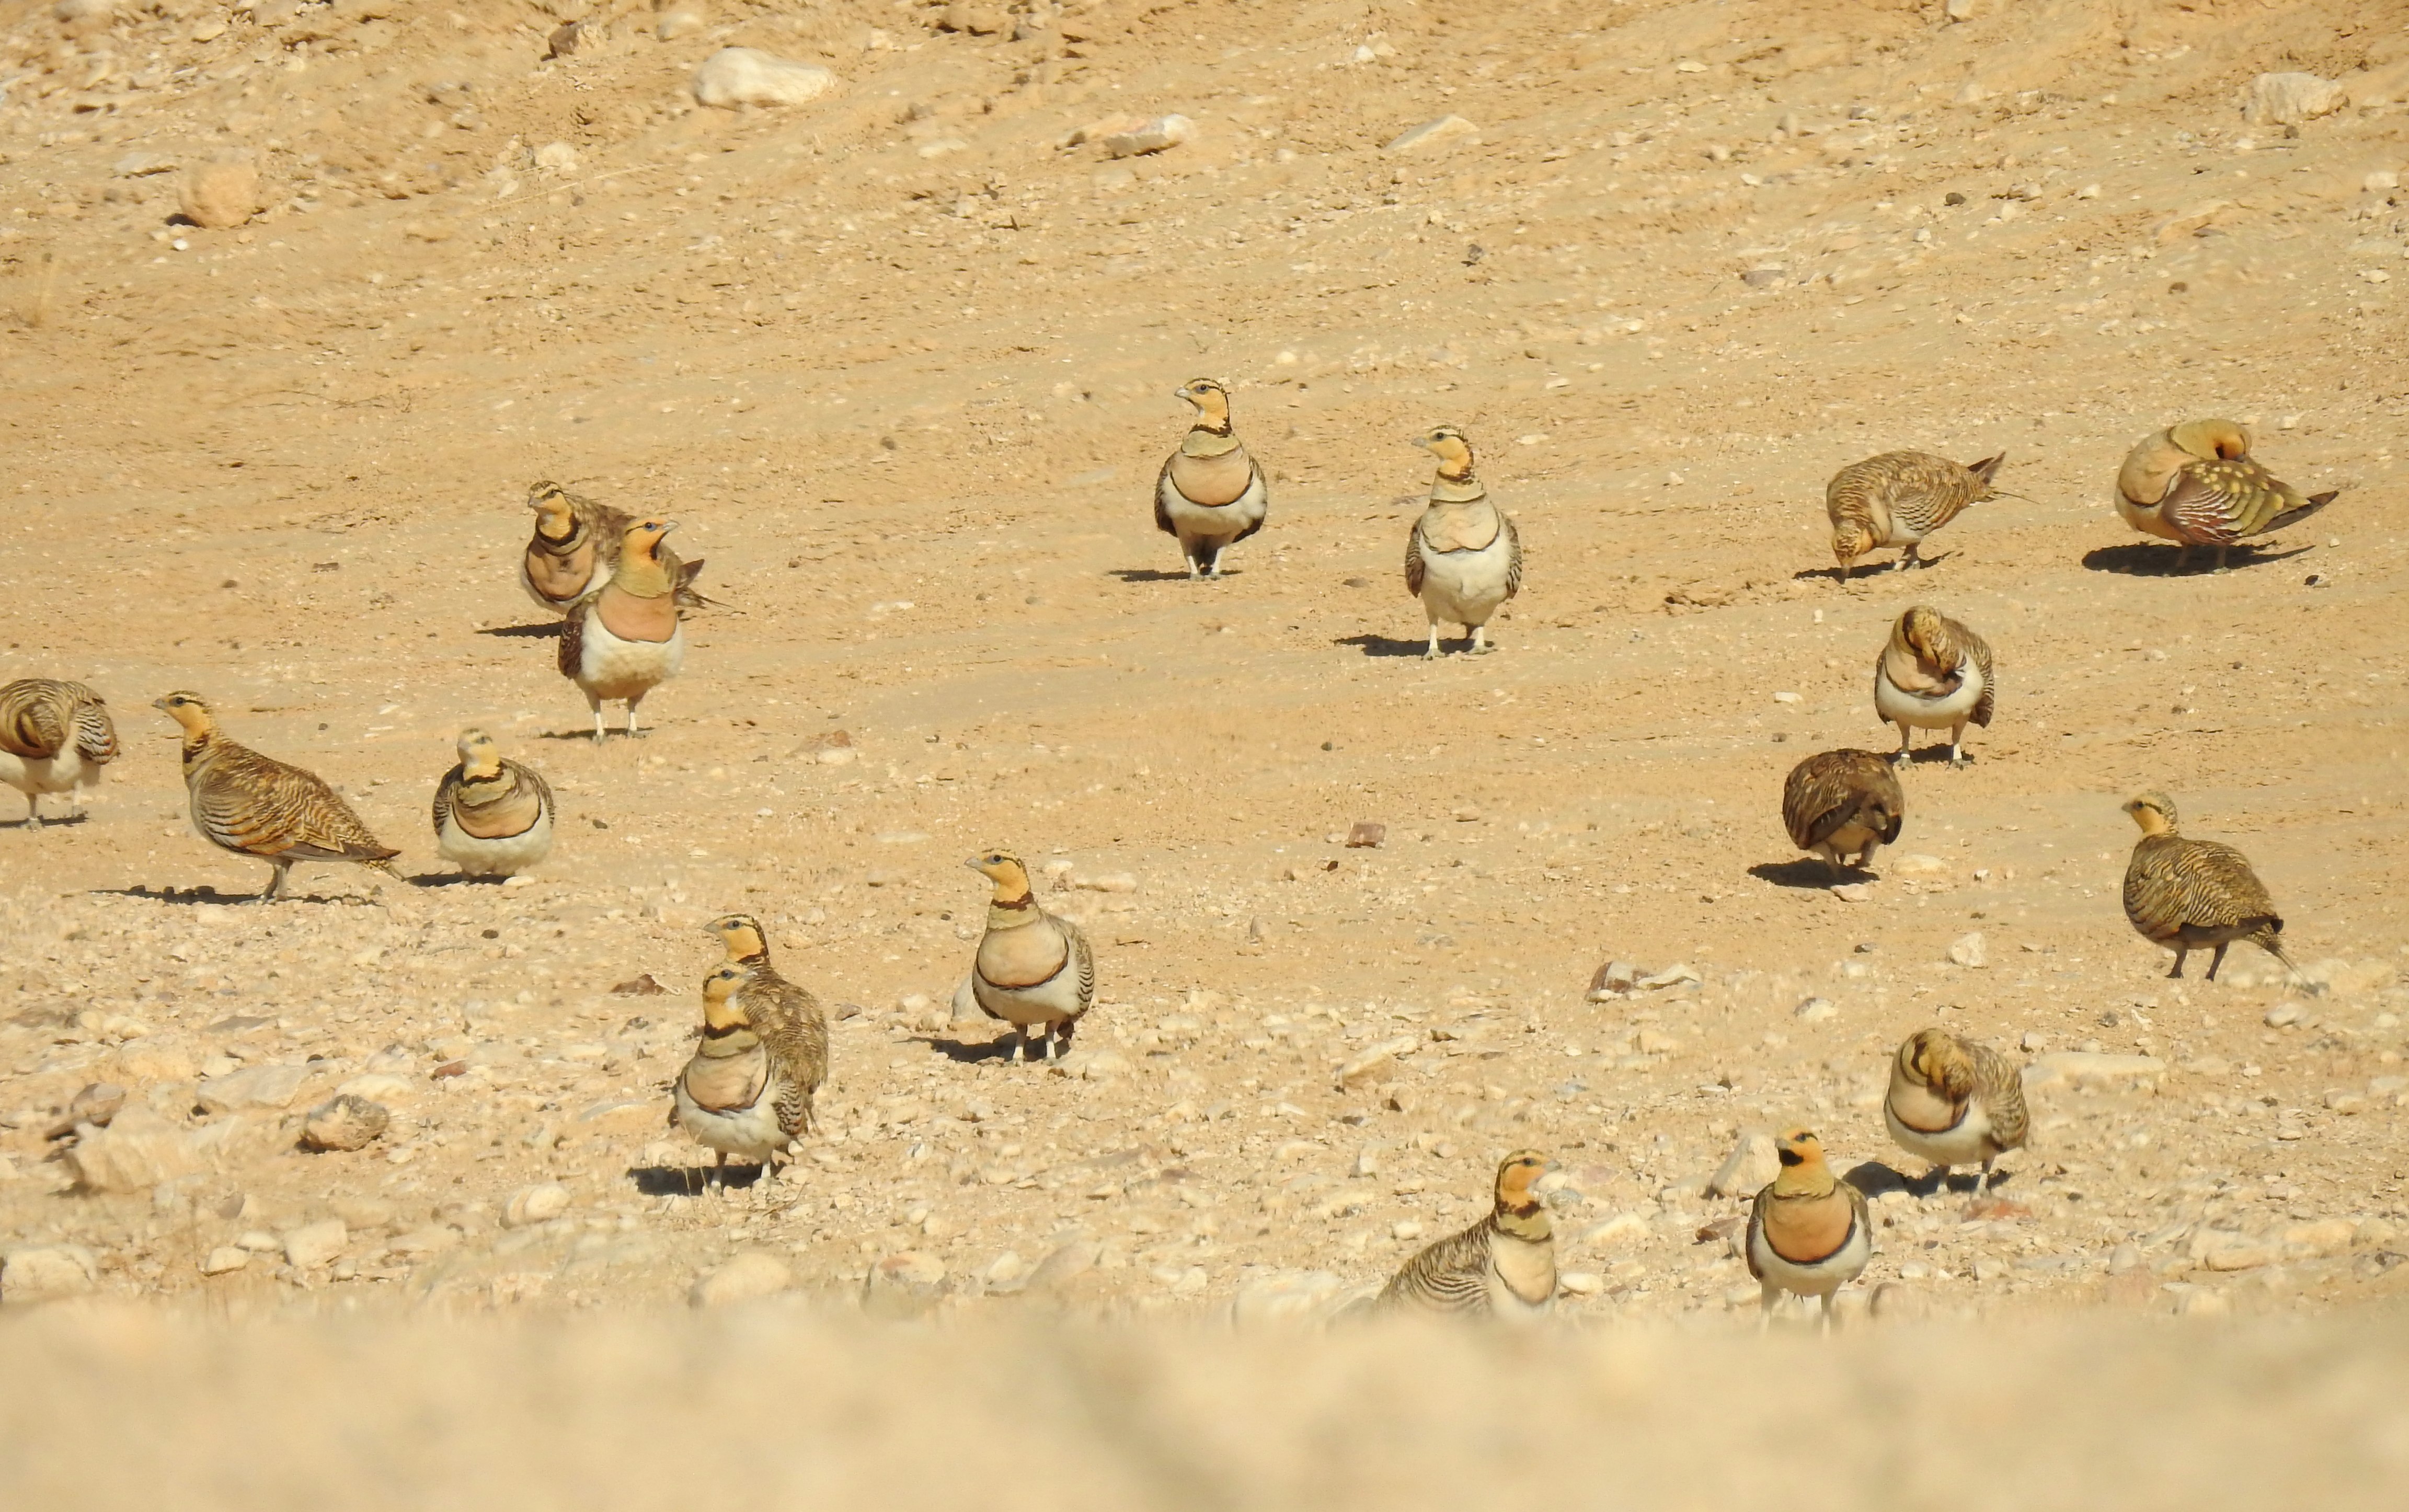 A small flock of pin-tailed sandgrouse